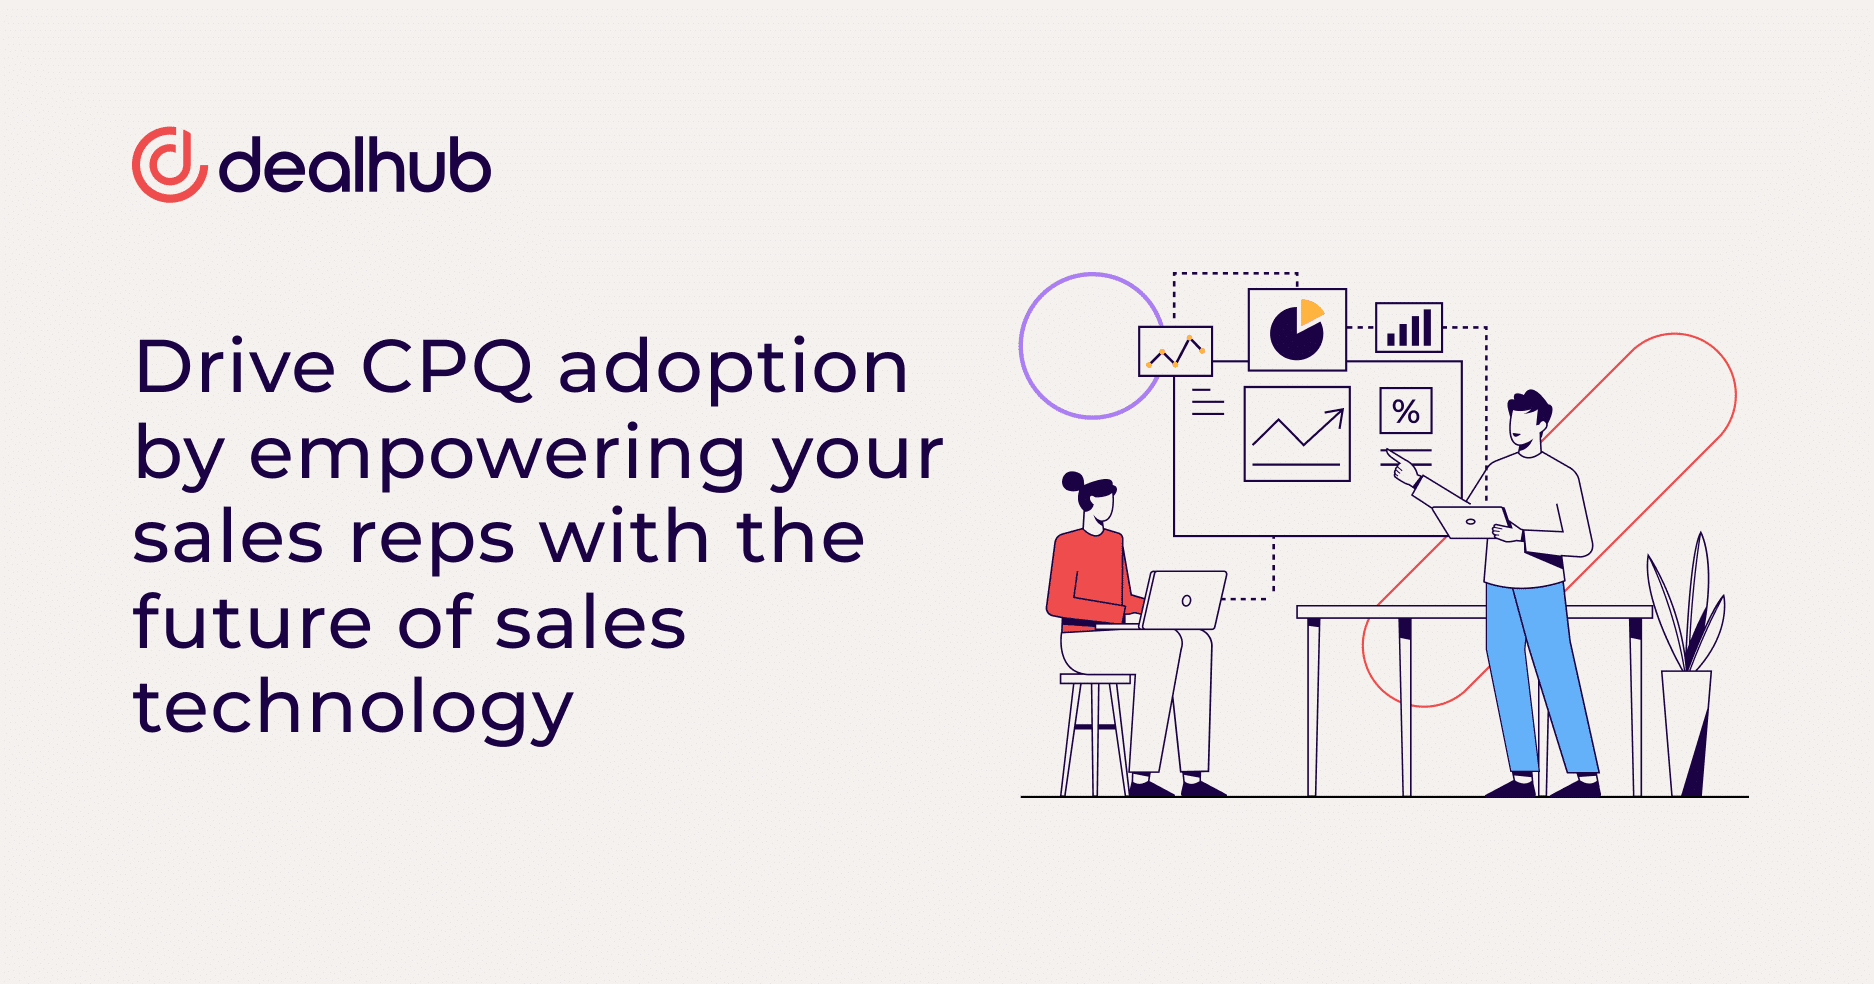 Drive CPQ adoption by empowering your sales reps